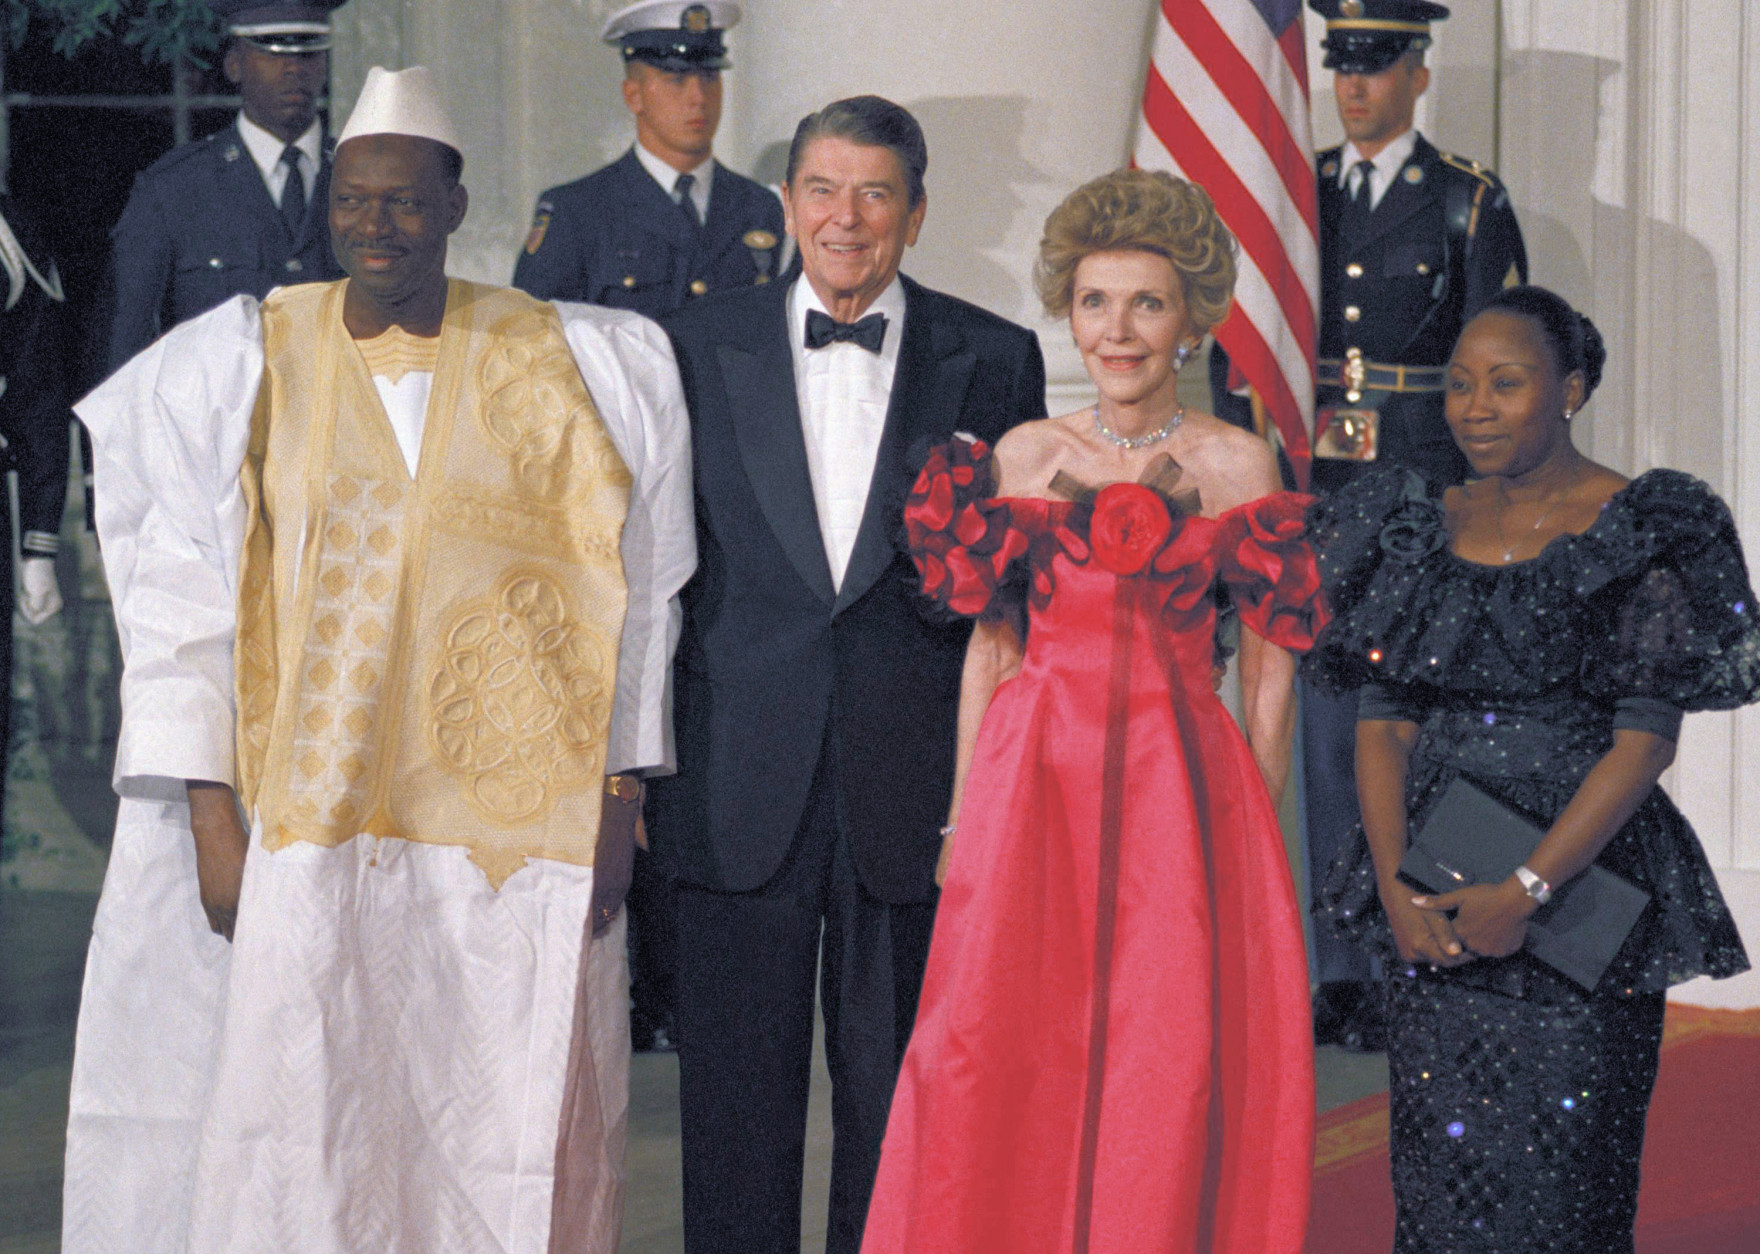 From left, Mali President Moussa Traore of Maii, joins President Ronald Reagan, Nancy Reagan, and Mariam Traore, wife of the Mali president, on arrival at the White House on Thursday, Oct. 6, 1988 in Washington.  The Mali president and his wife were greeted at the front entrance of the  White House for a state dinner in their honor. (AP Photo/J. Scott Applewhite)